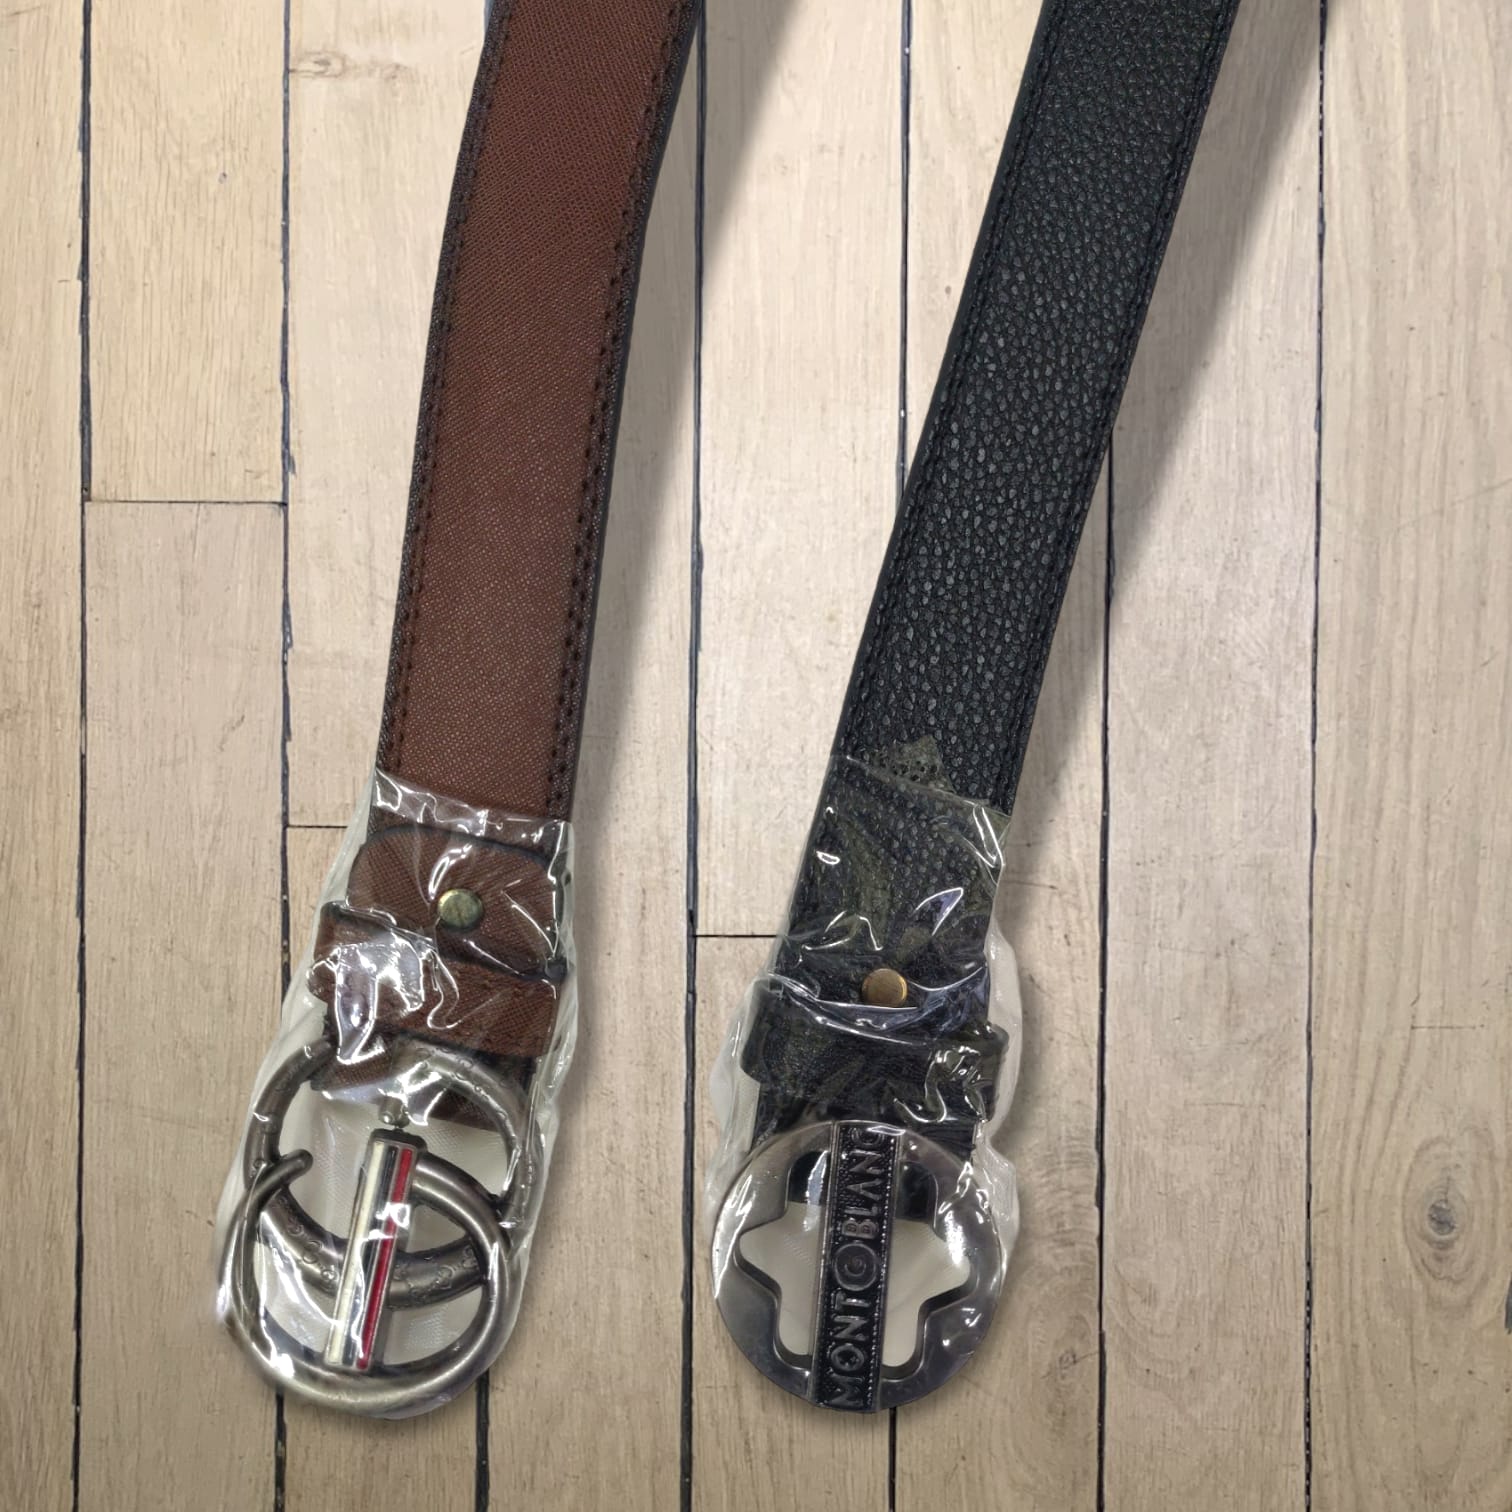 Formal/Casual Stylish Belts Combo For Men